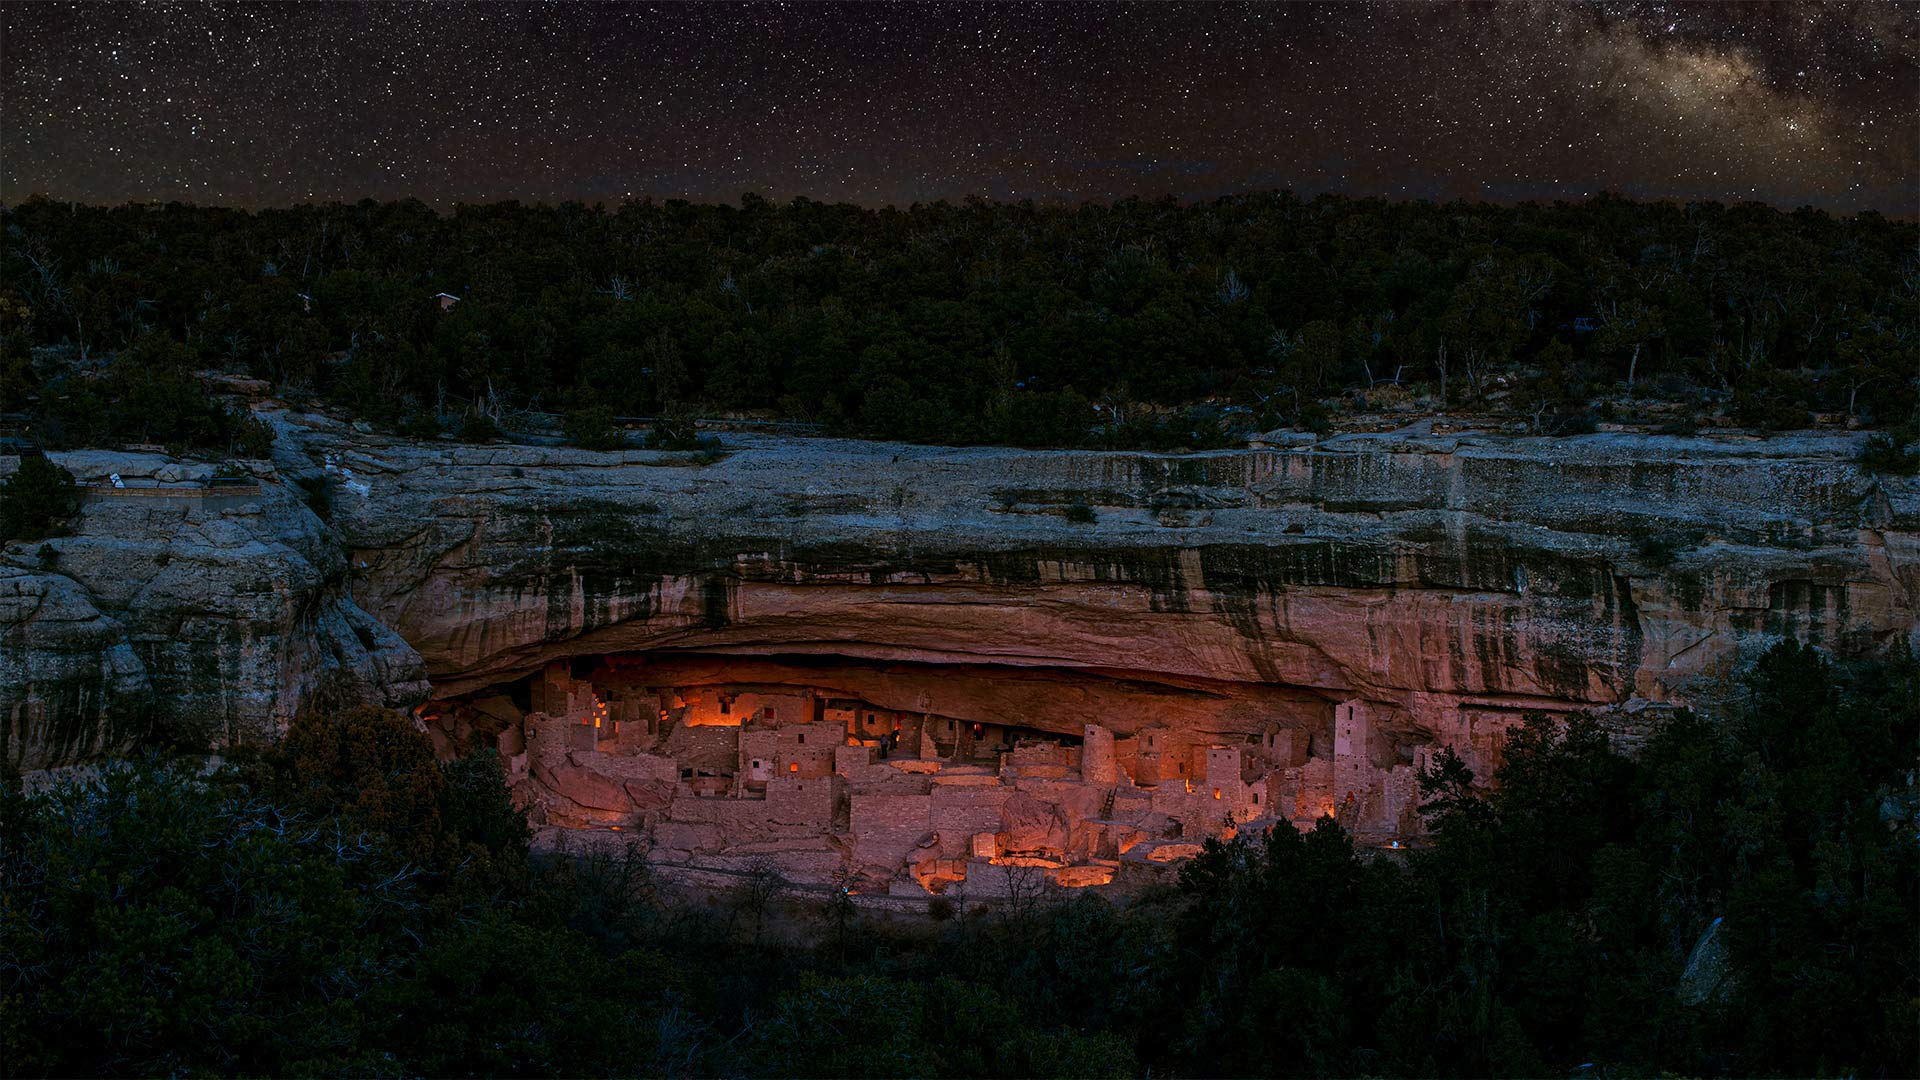 Cliff dwellings in Mesa Verde National Park, Colorado - Brad McGinley Photography/Getty Images)